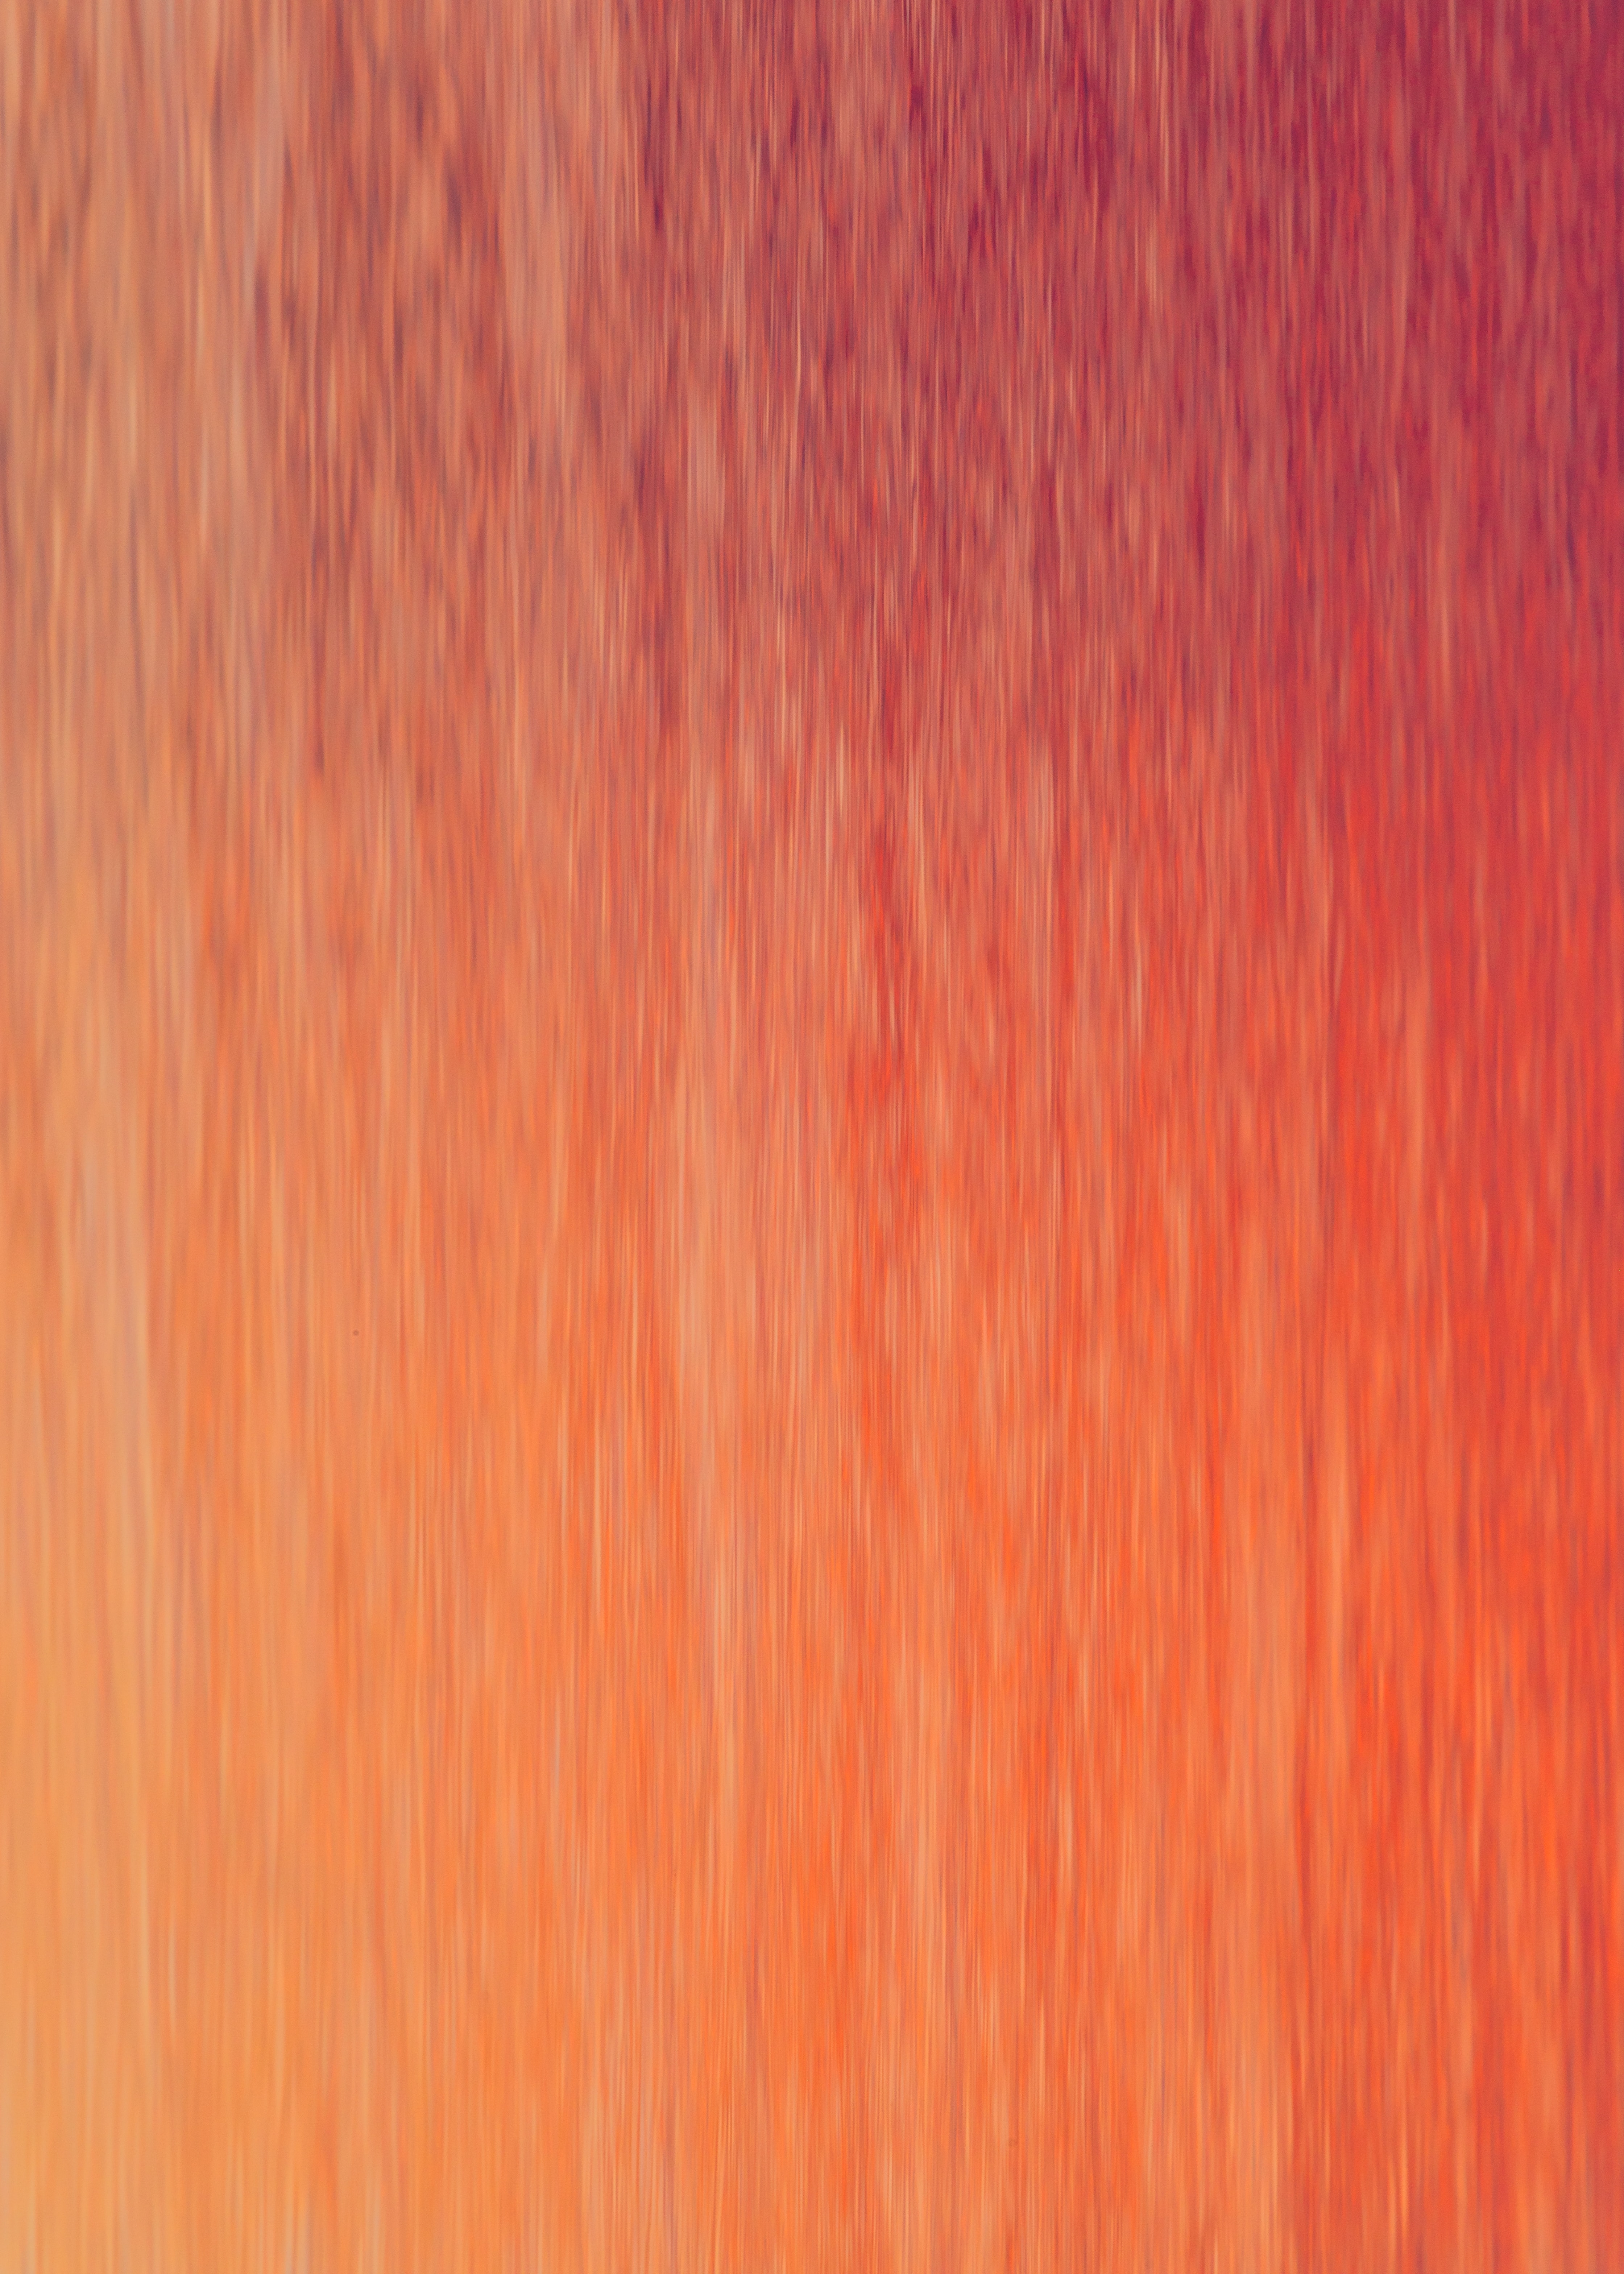 79010 free wallpaper 720x1520 for phone, download images smooth, blur, orange, abstract 720x1520 for mobile